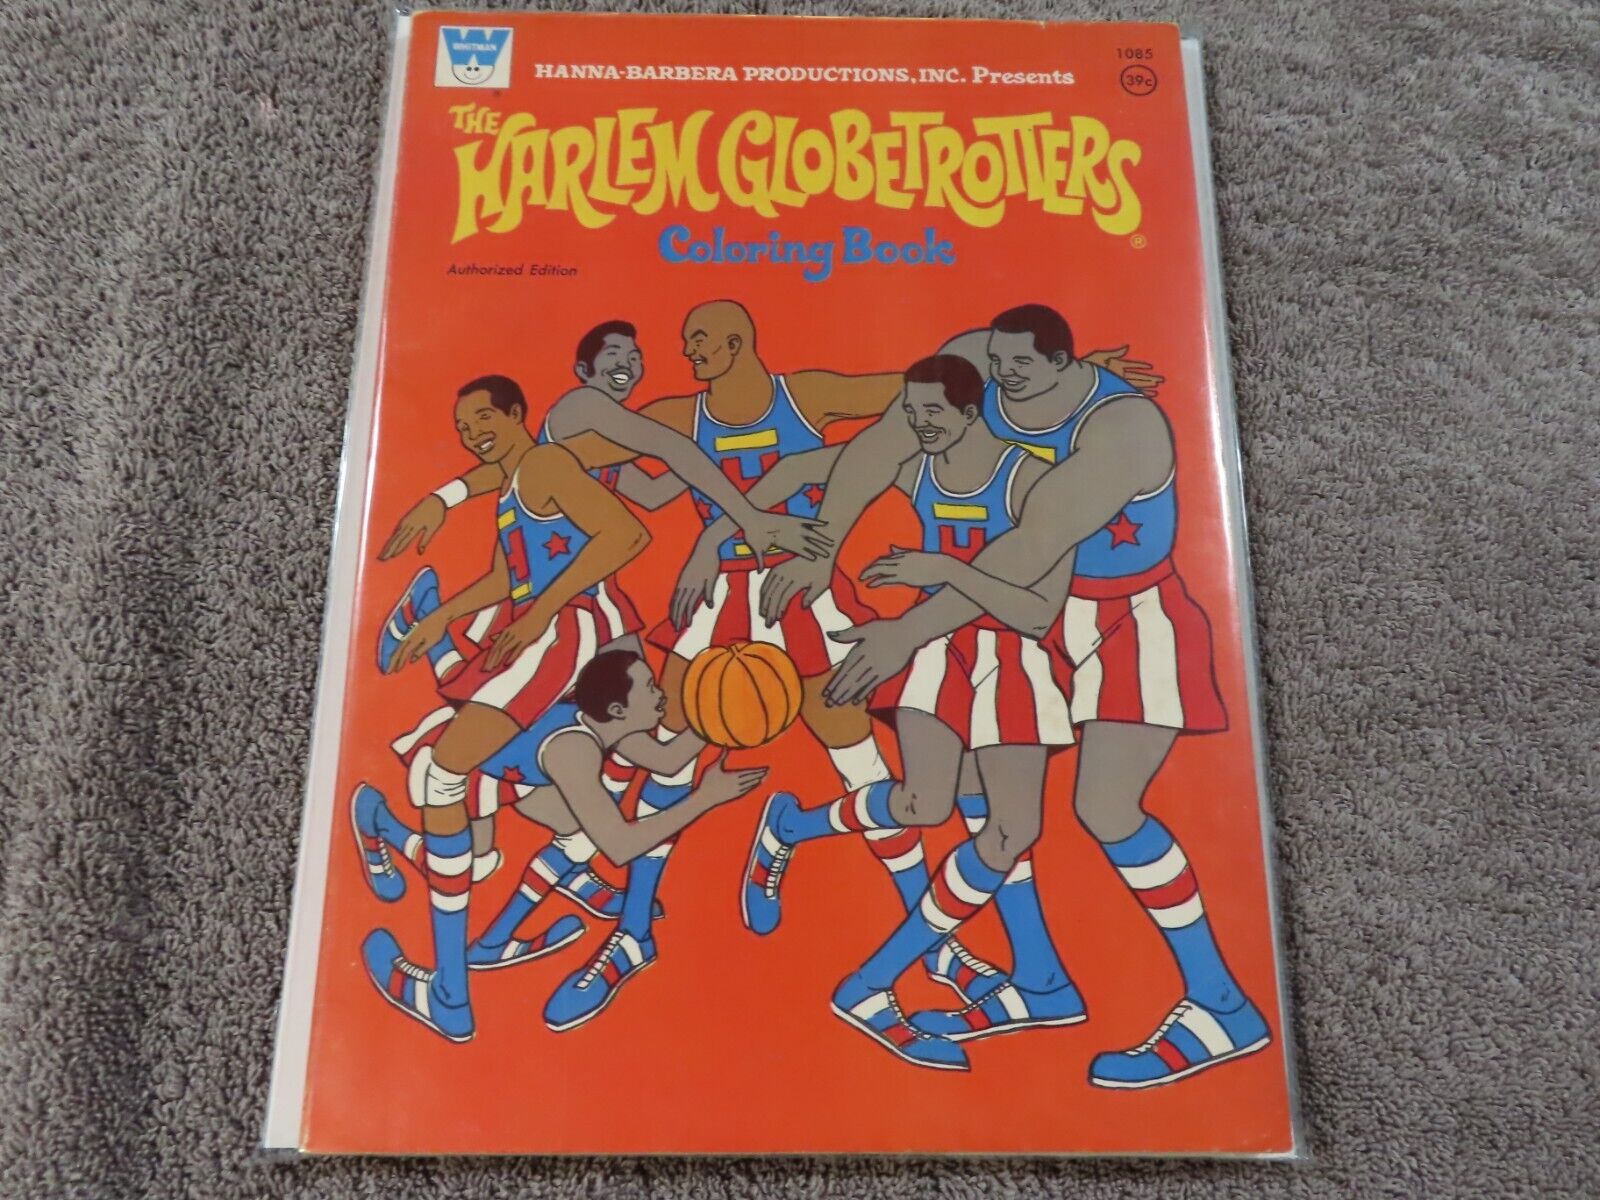 Rare 1971 WHITMAN Publishing THE HARLEM GLOBETROTTERS Coloring Book - FN/VF